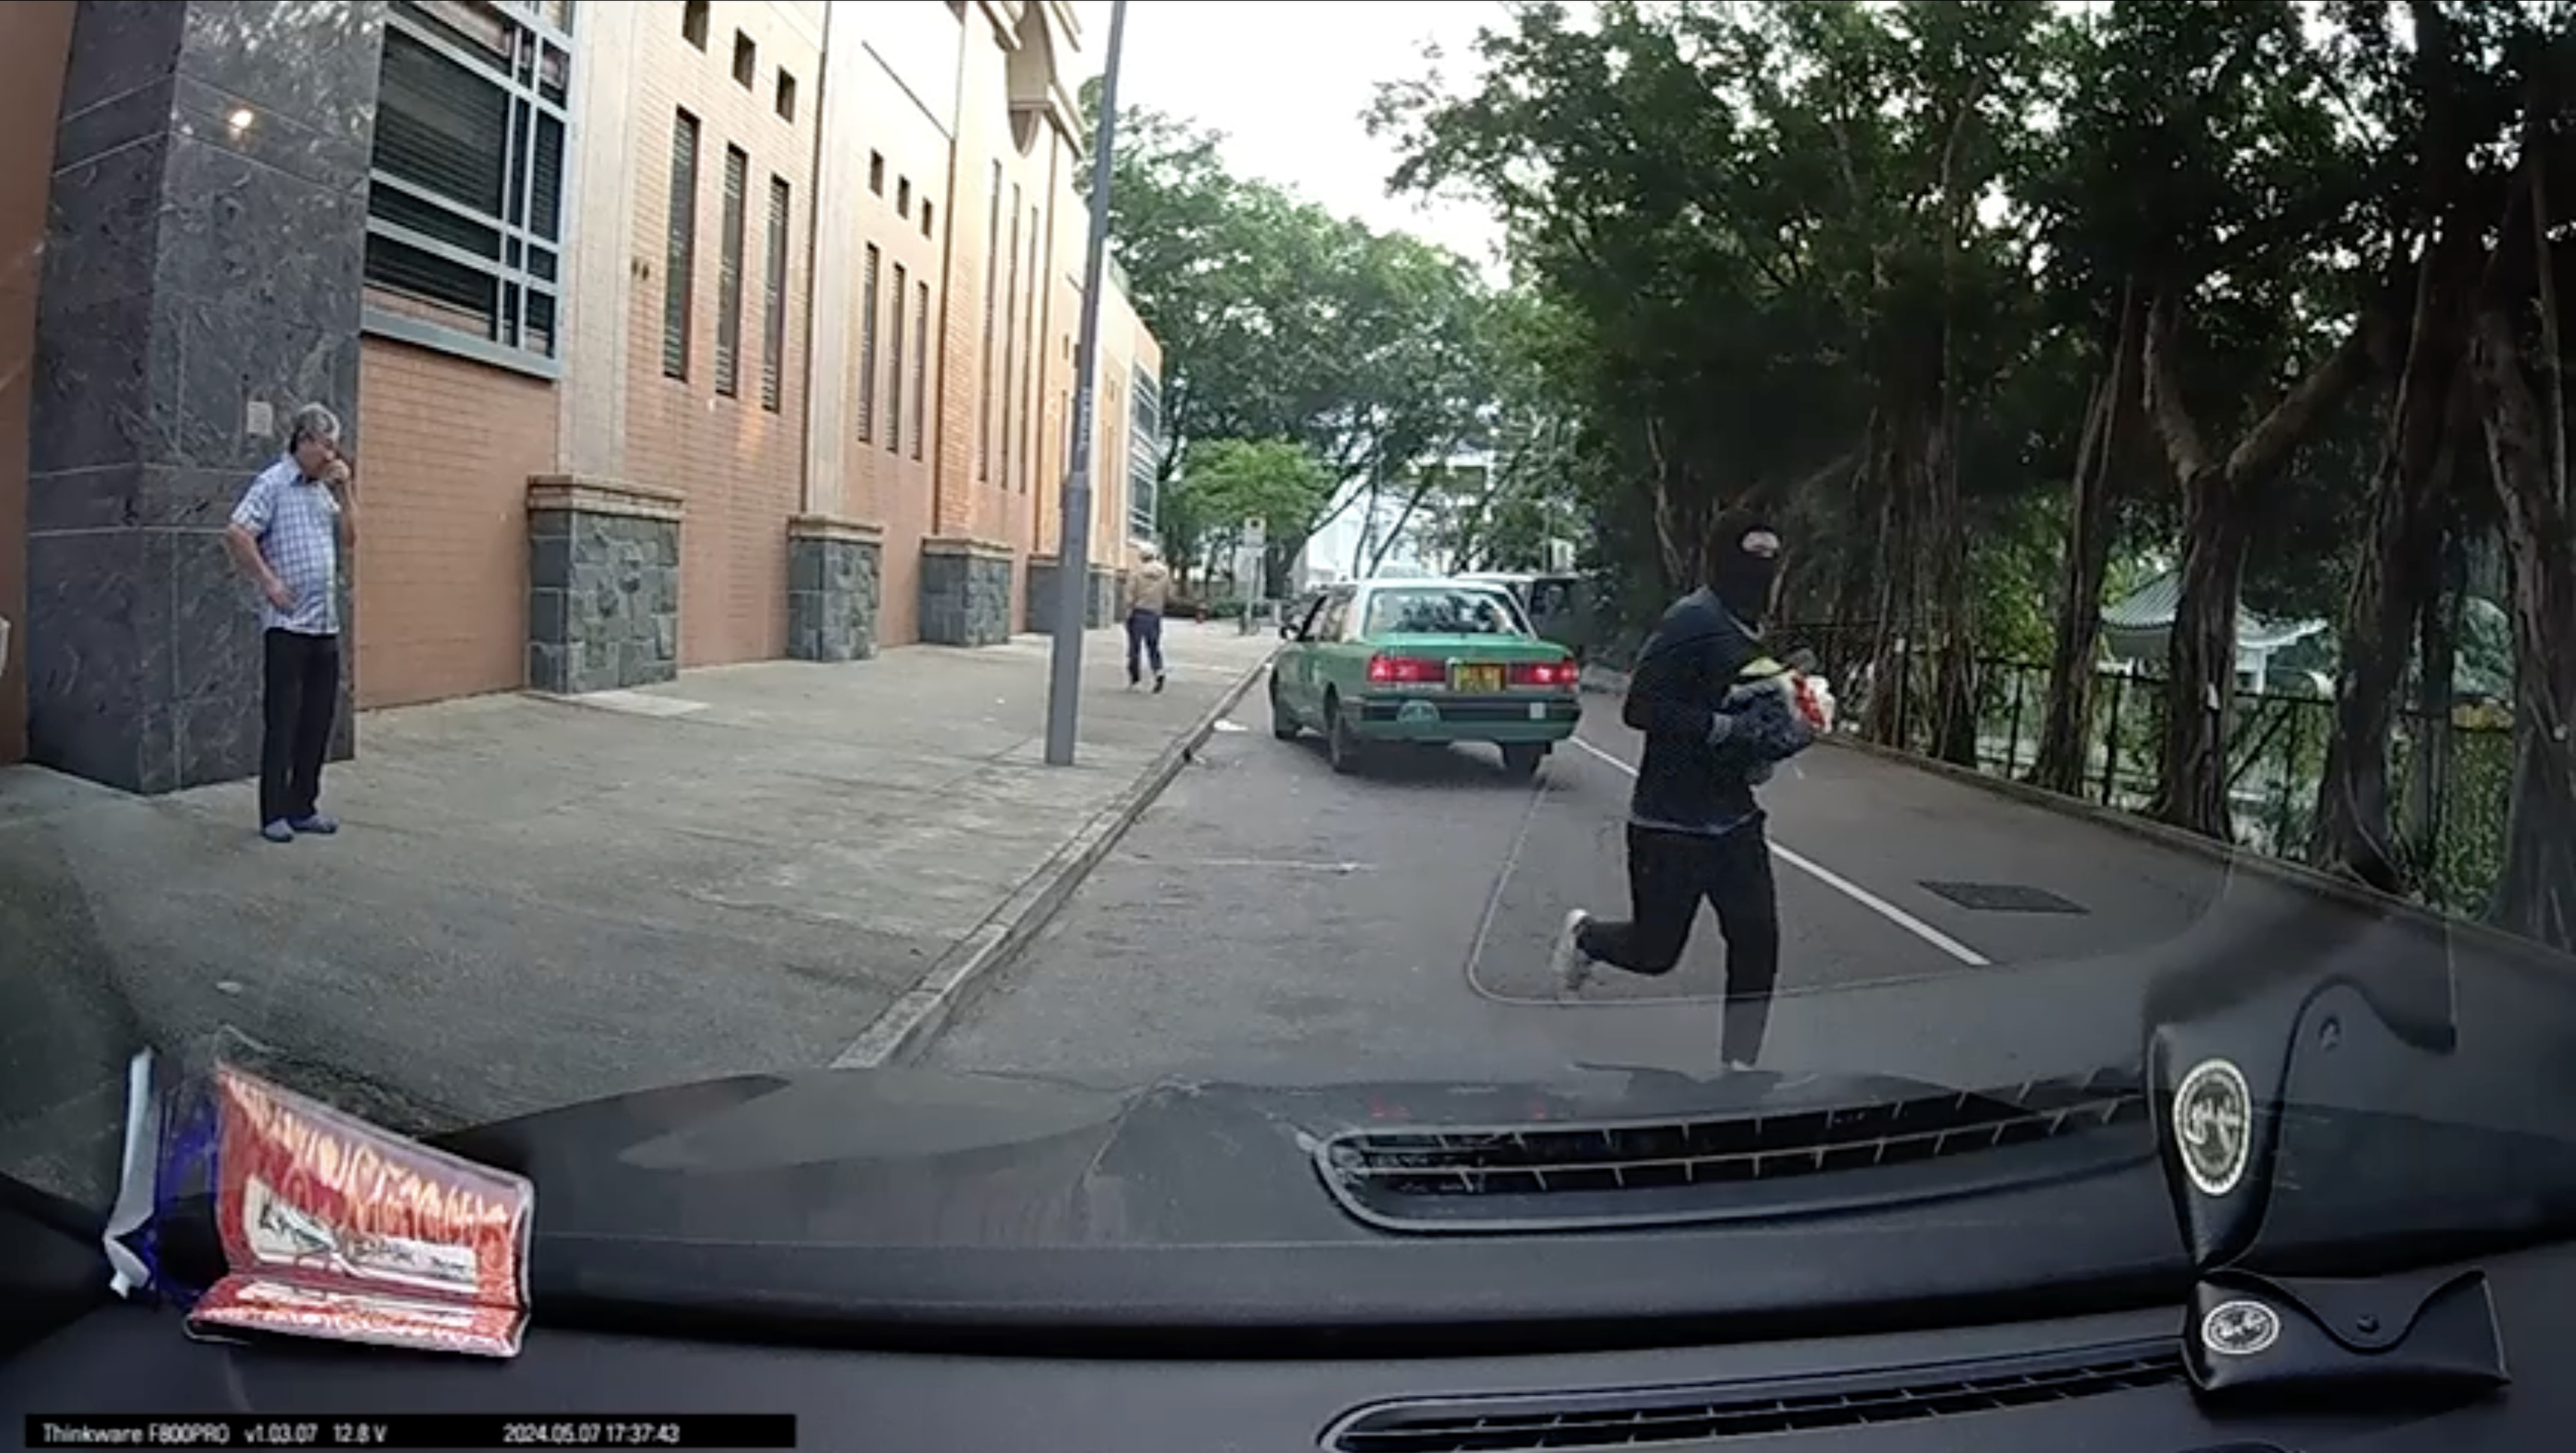 Dashcam footage shows one of the robbers making off with the stolen goods. Photo: Handout